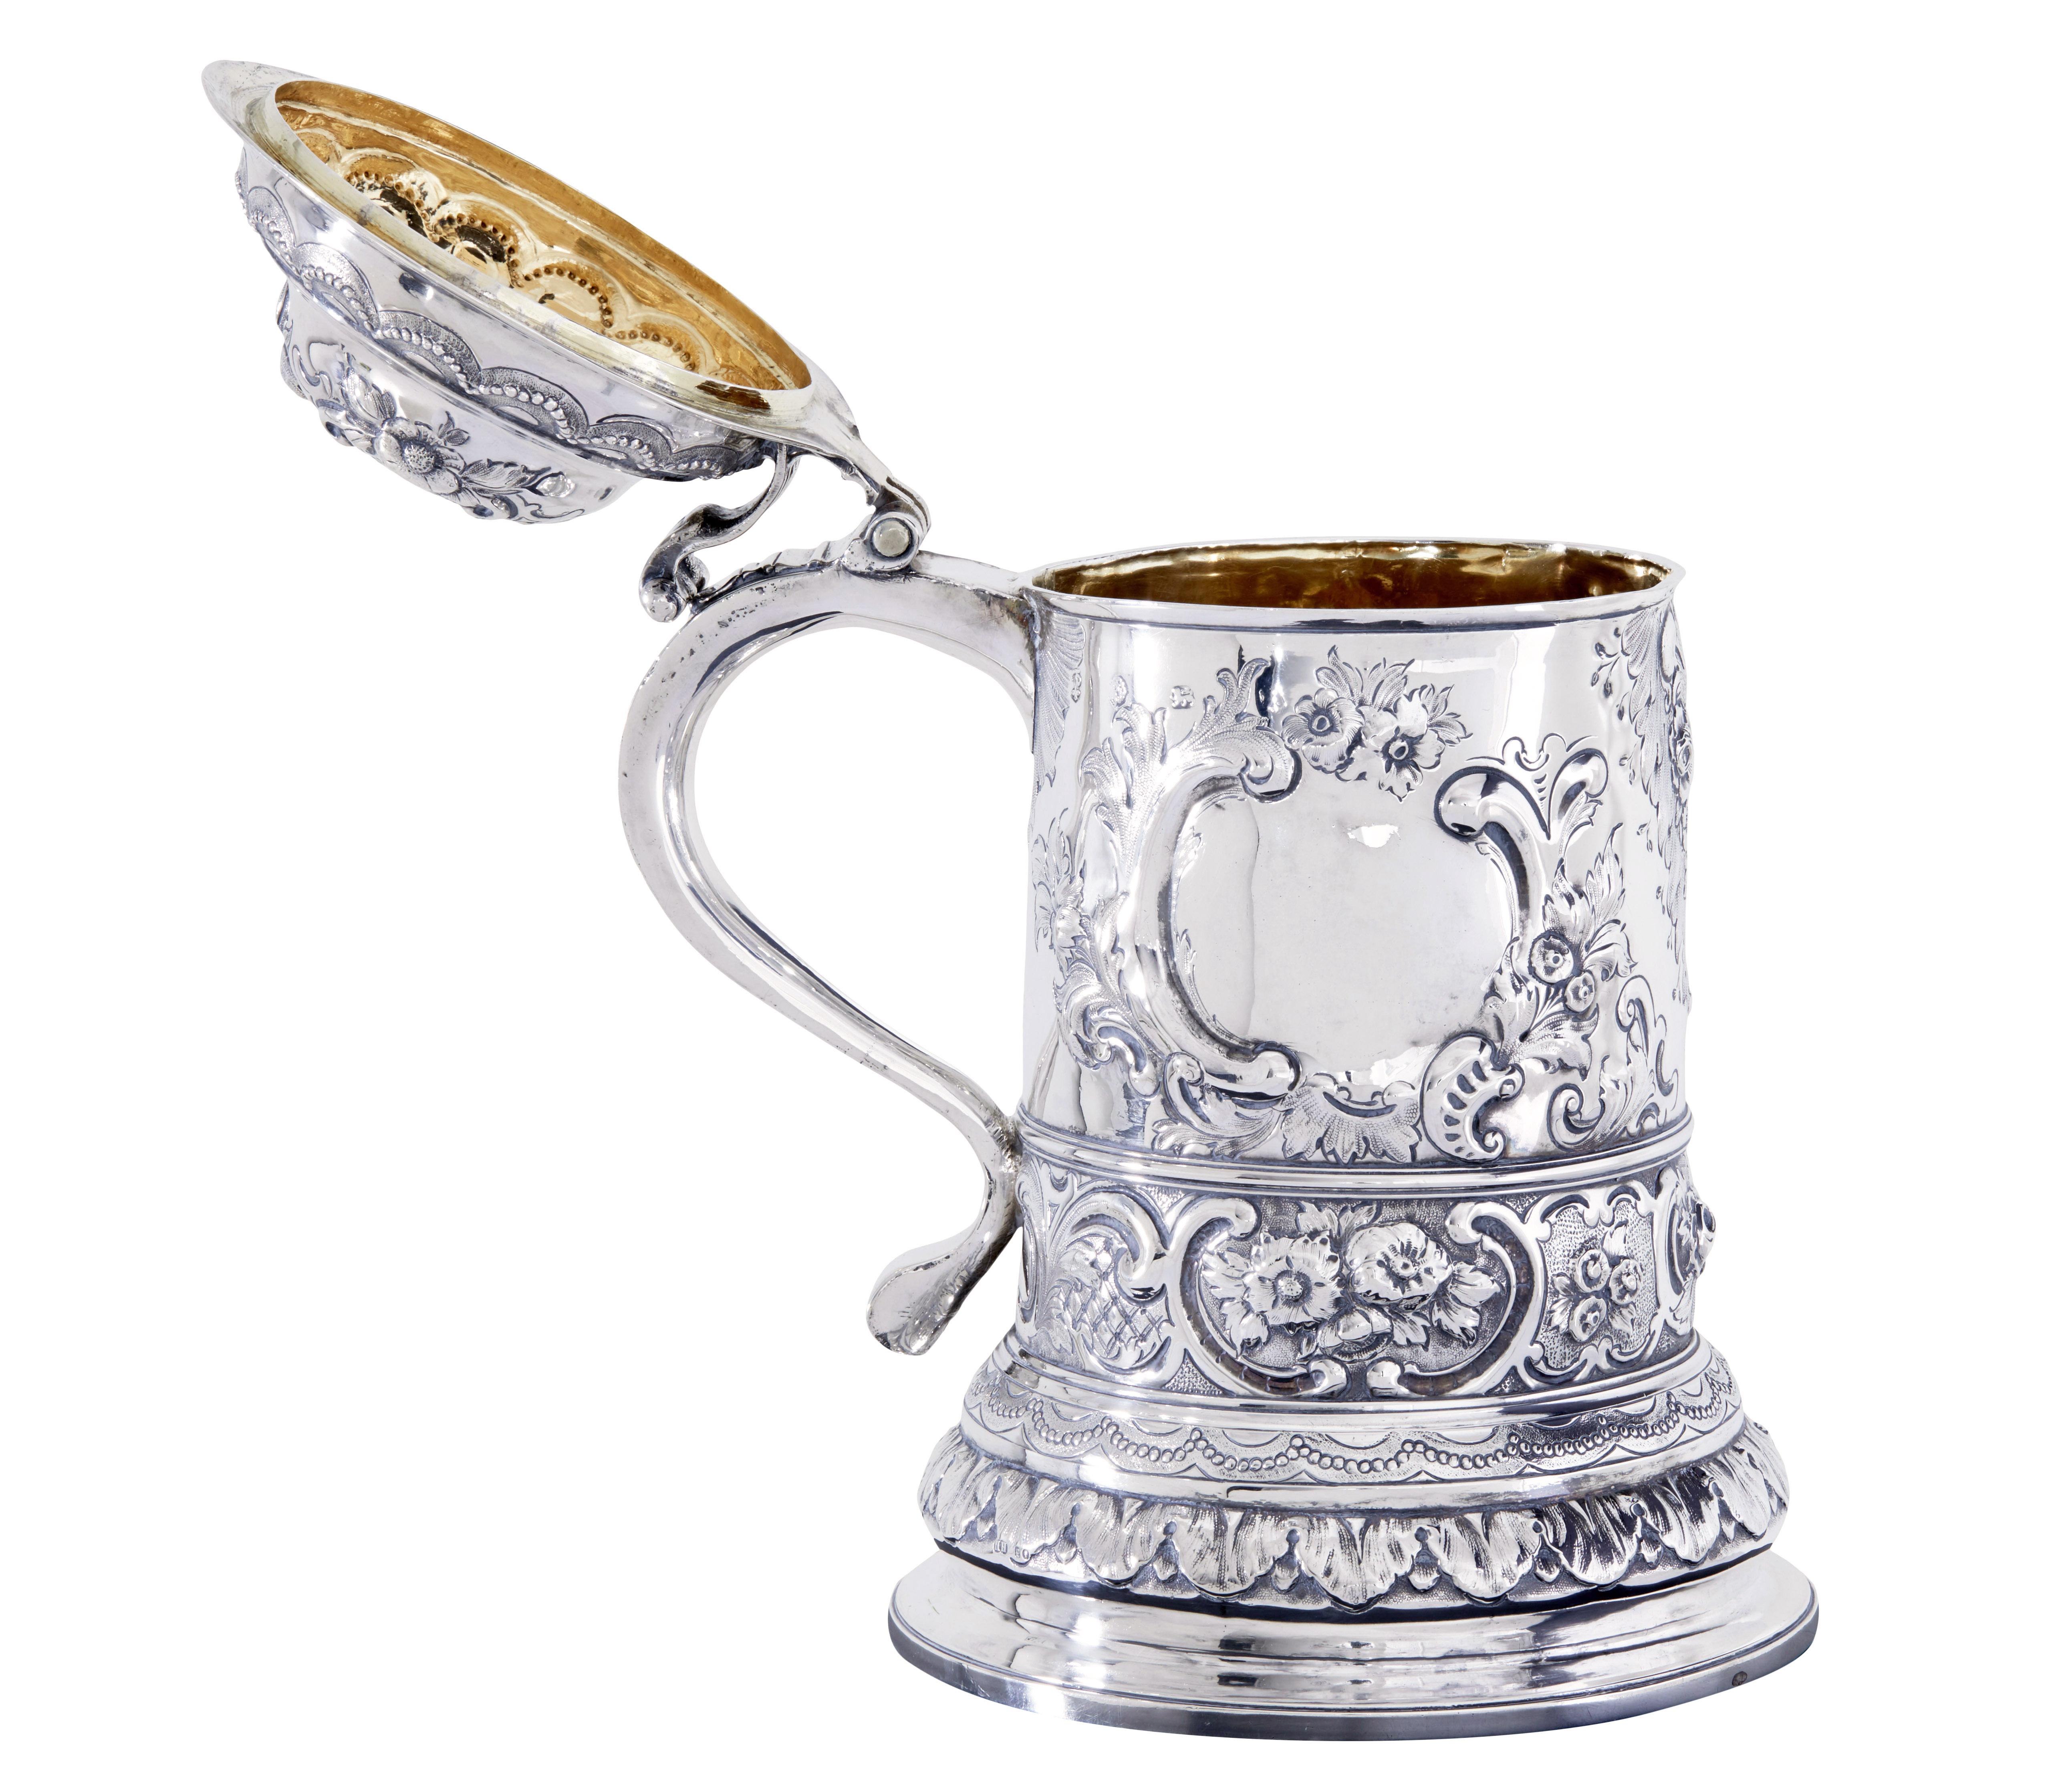 John Penfold (aka penford) makers mark rococo silver lidded tankard, circa 1723.

Here we have a beautiful silver lidded tankard in the rococo style.  The interior is gilded and

Overall condition is good.

The tankard bears exterior and interior